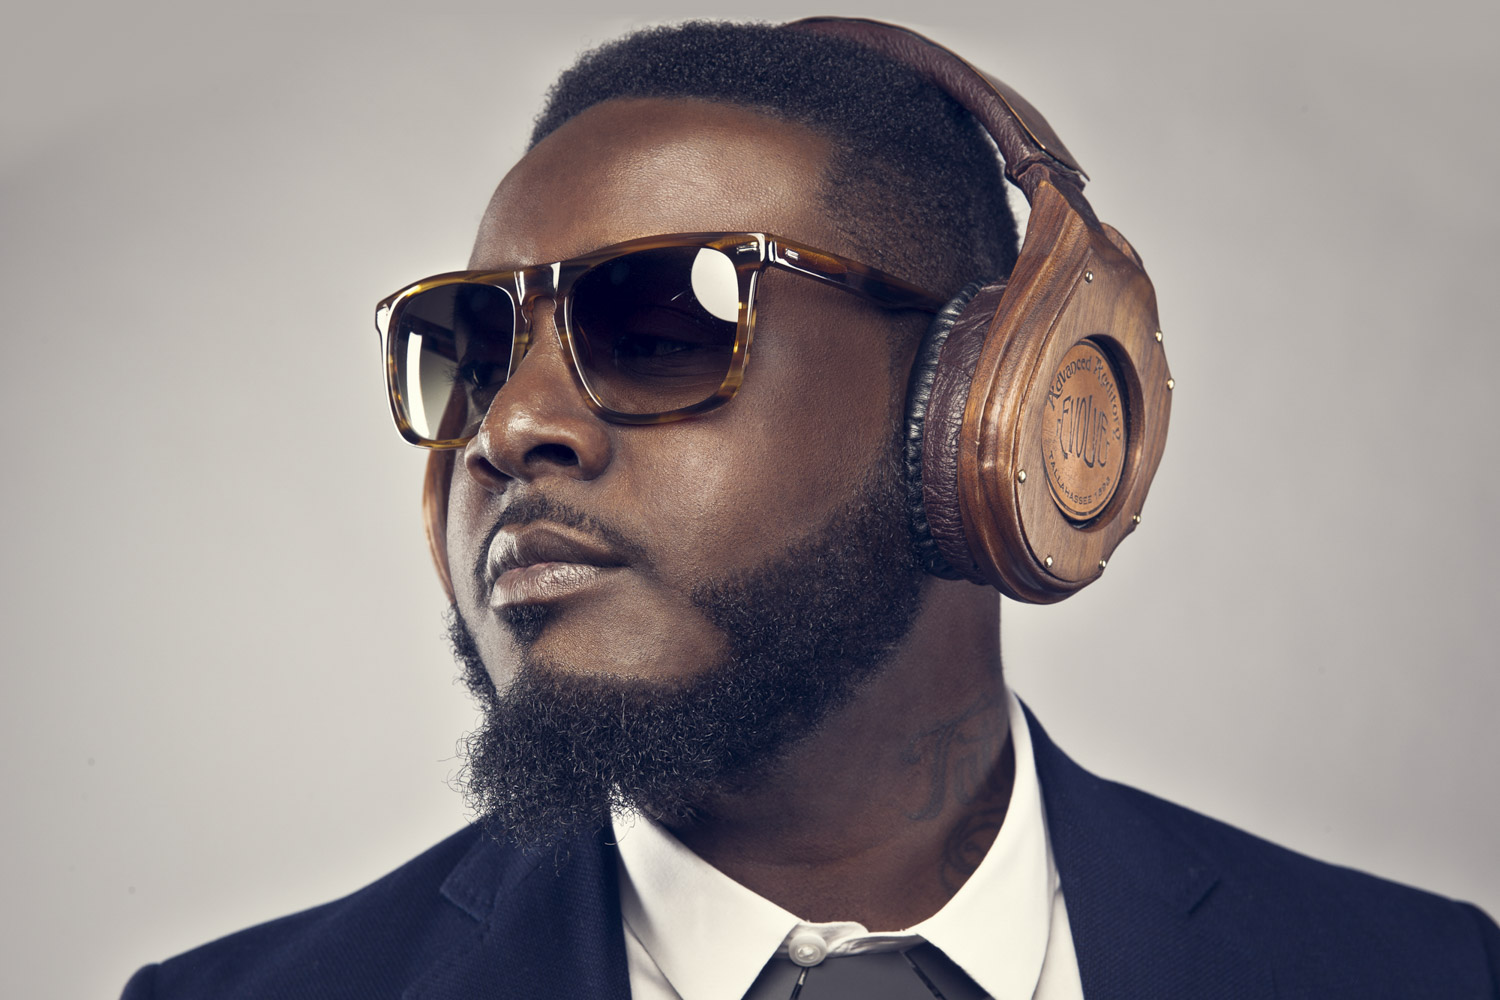 T-Pain wearing wooden headphones and sunglasses looks away from the camera